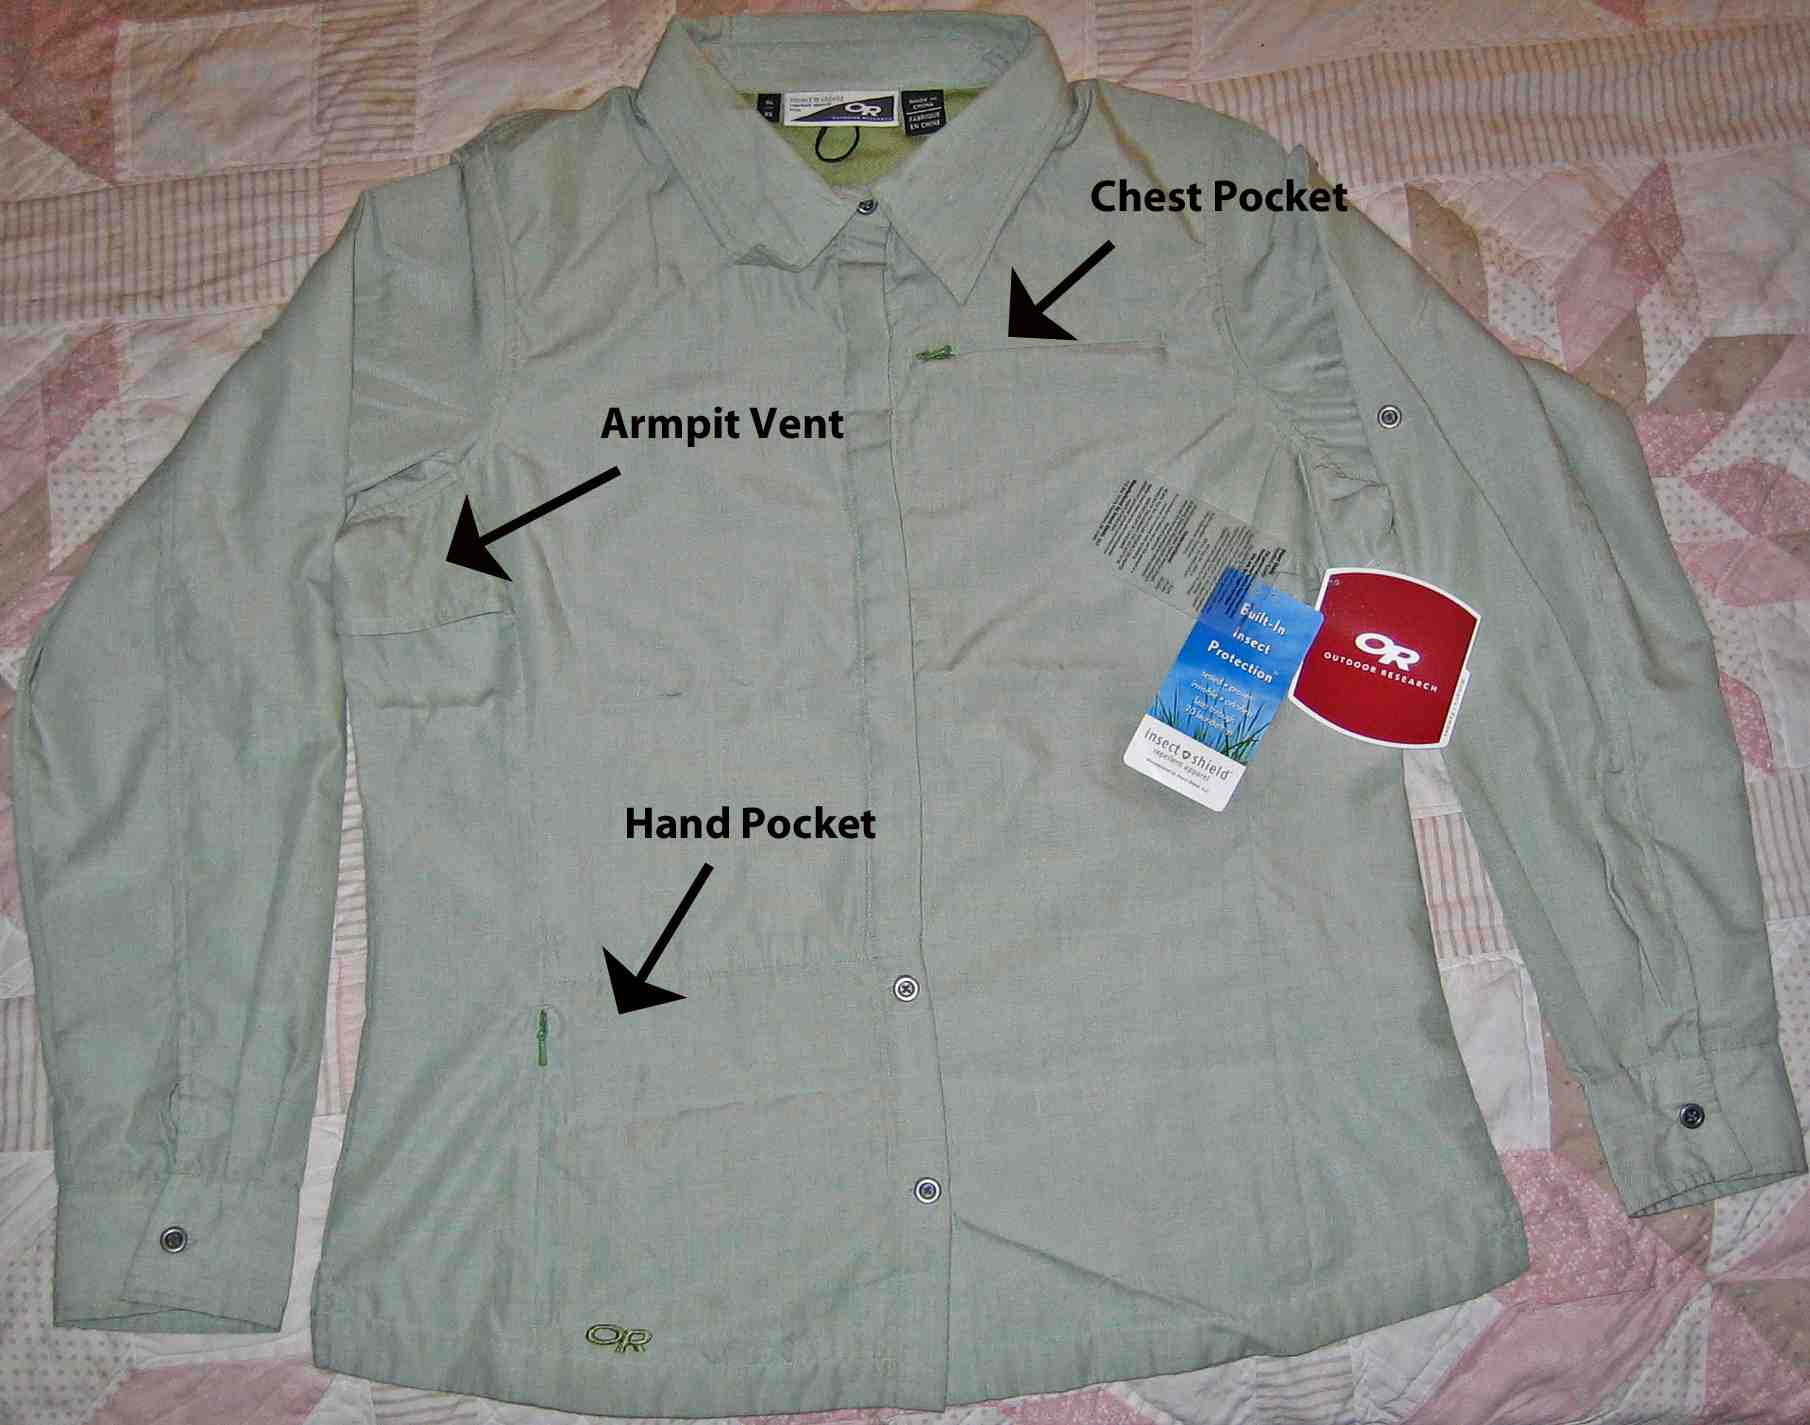 Shirt with tags/color more accurate